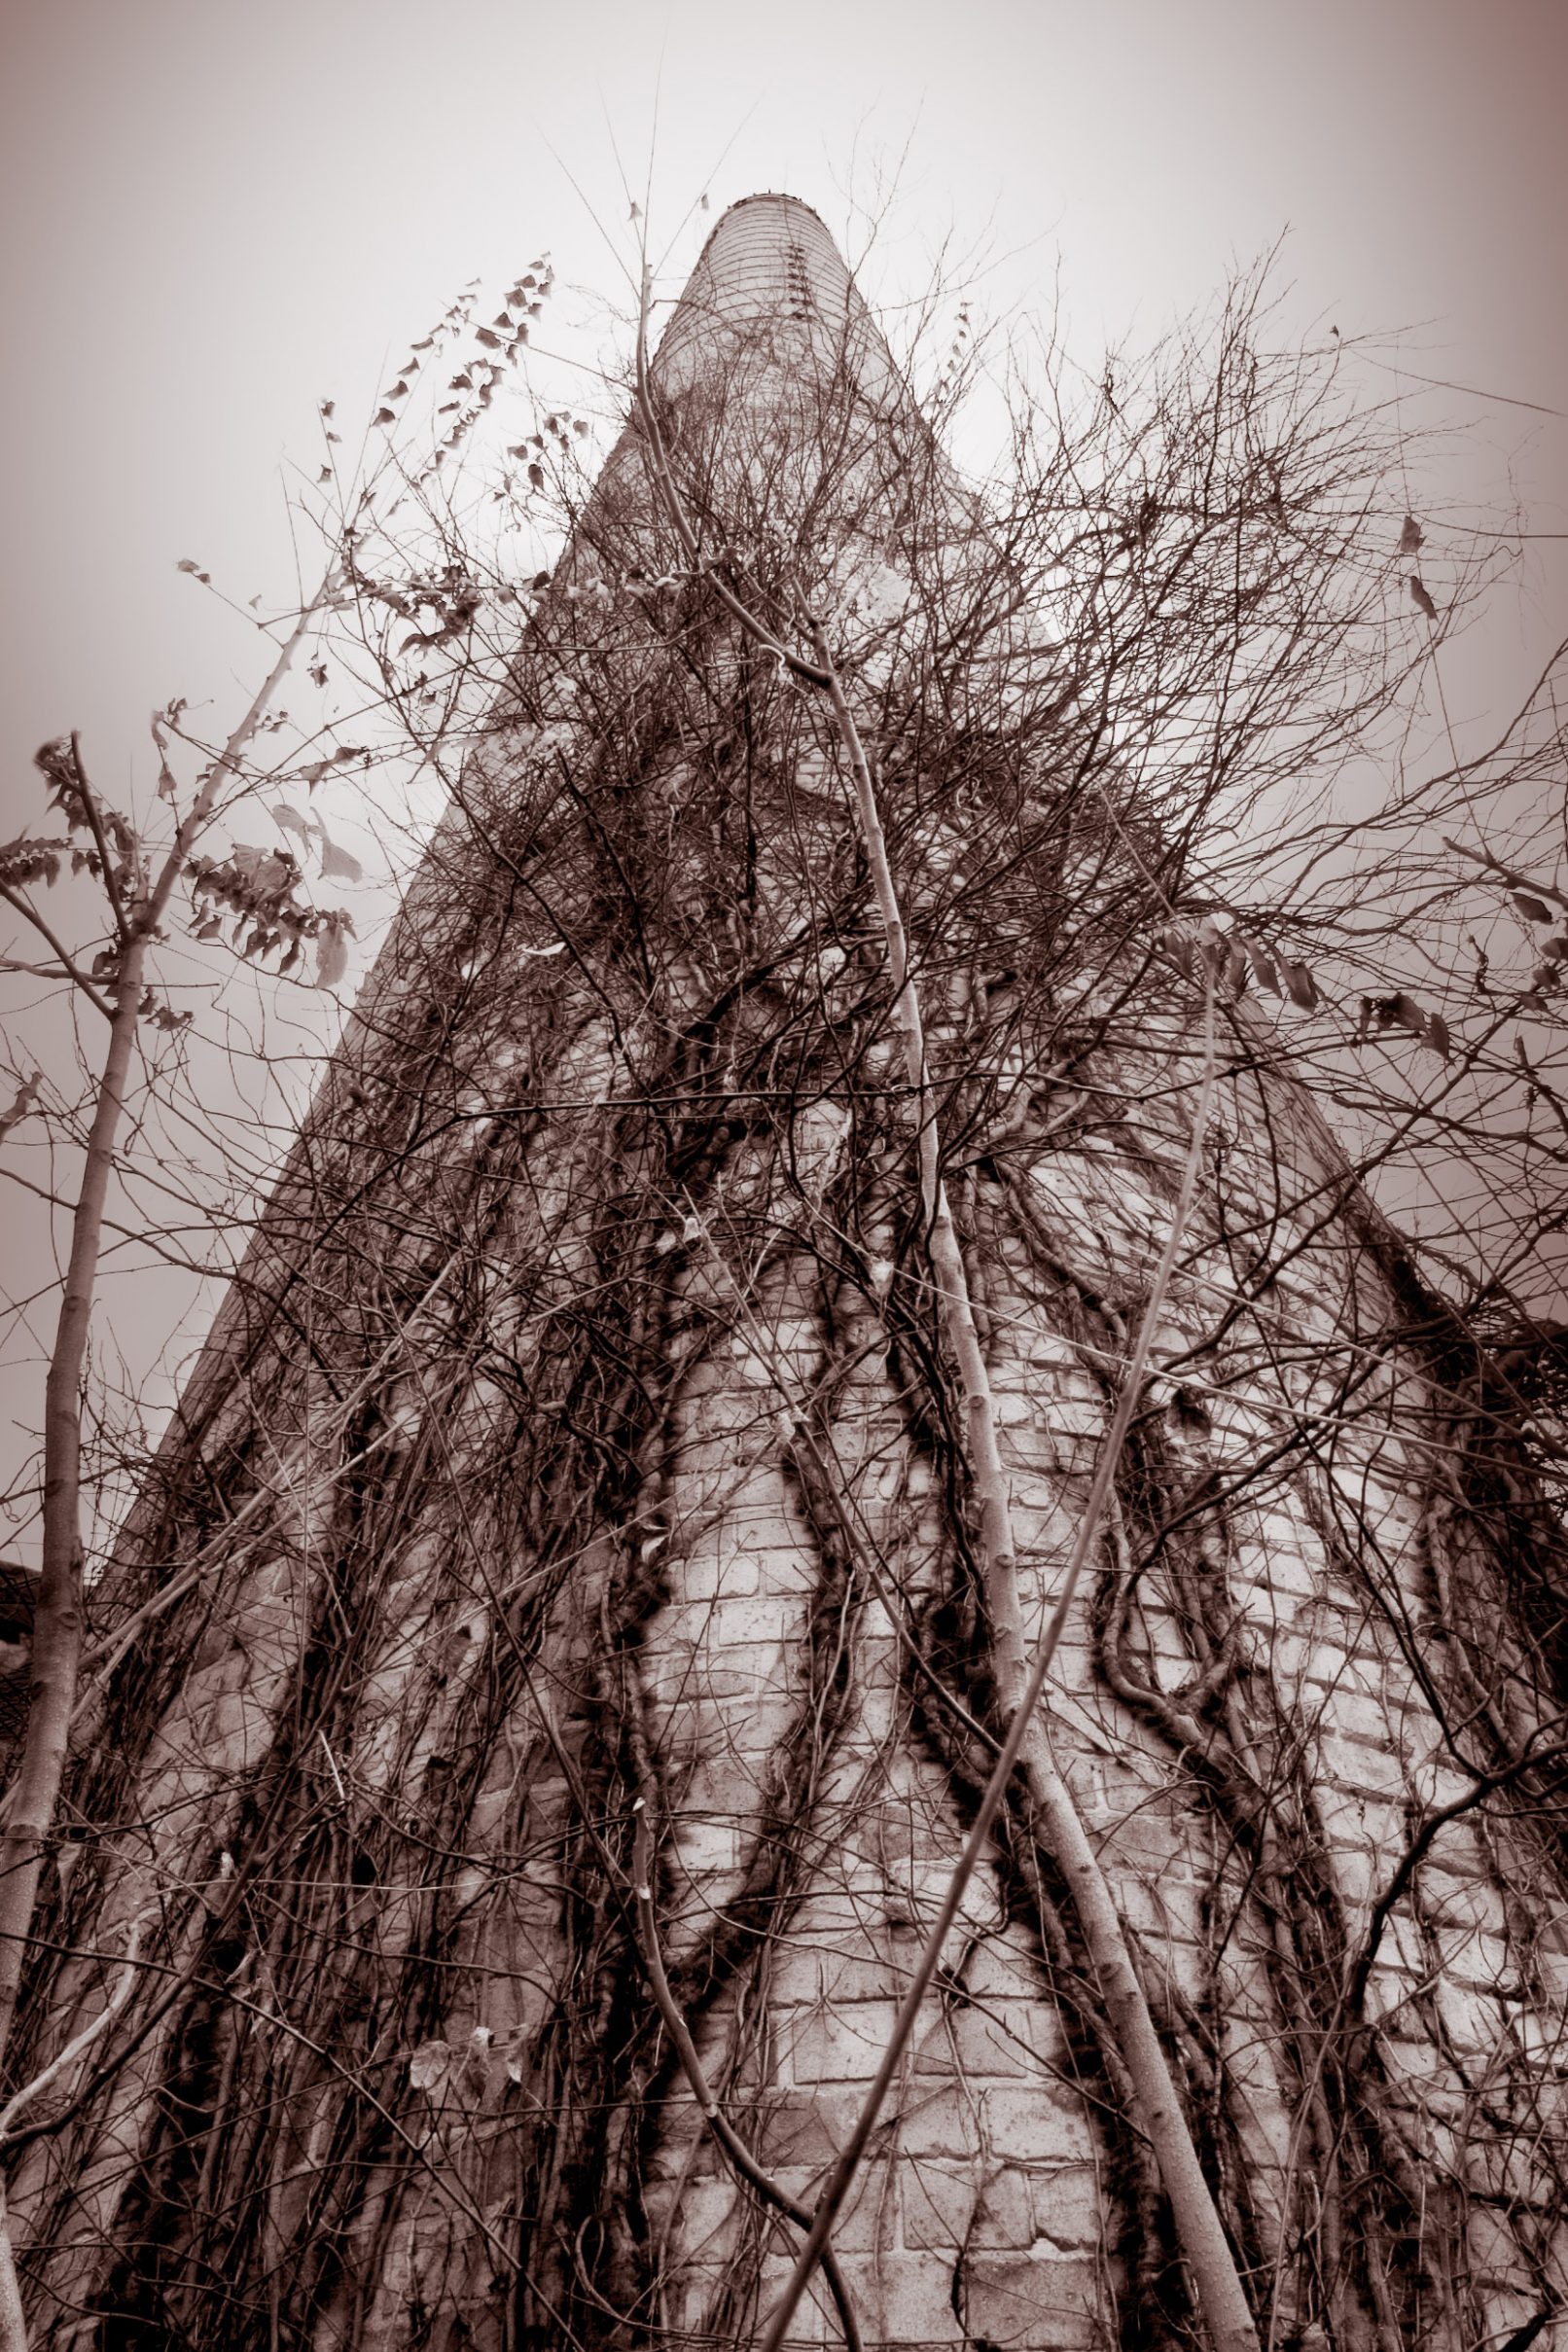 Old factory chimney with vines and trees